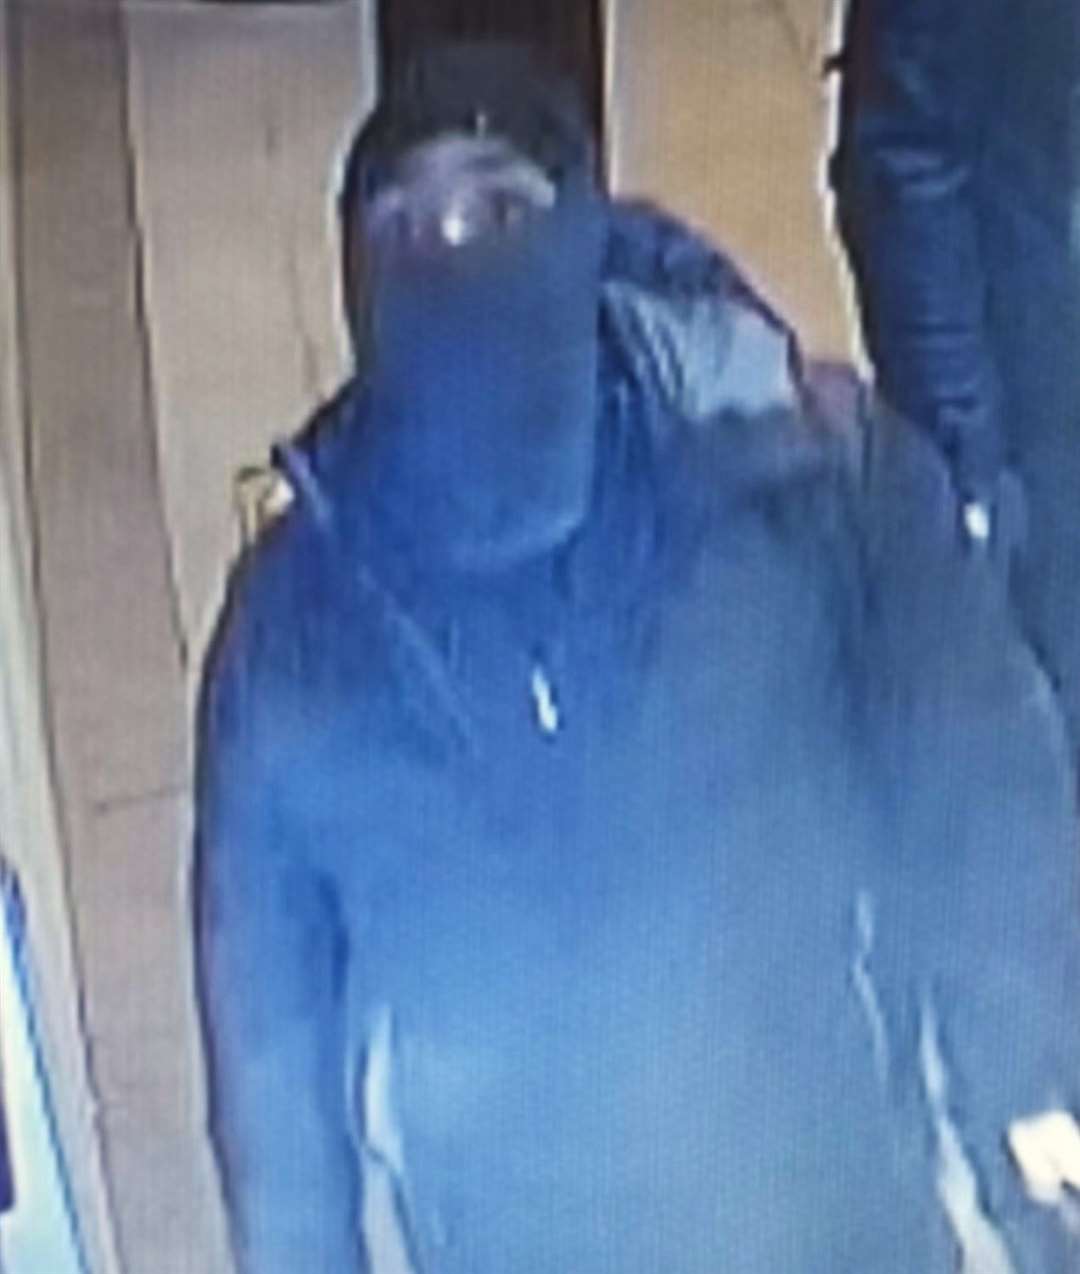 Police issued images of the suspect.